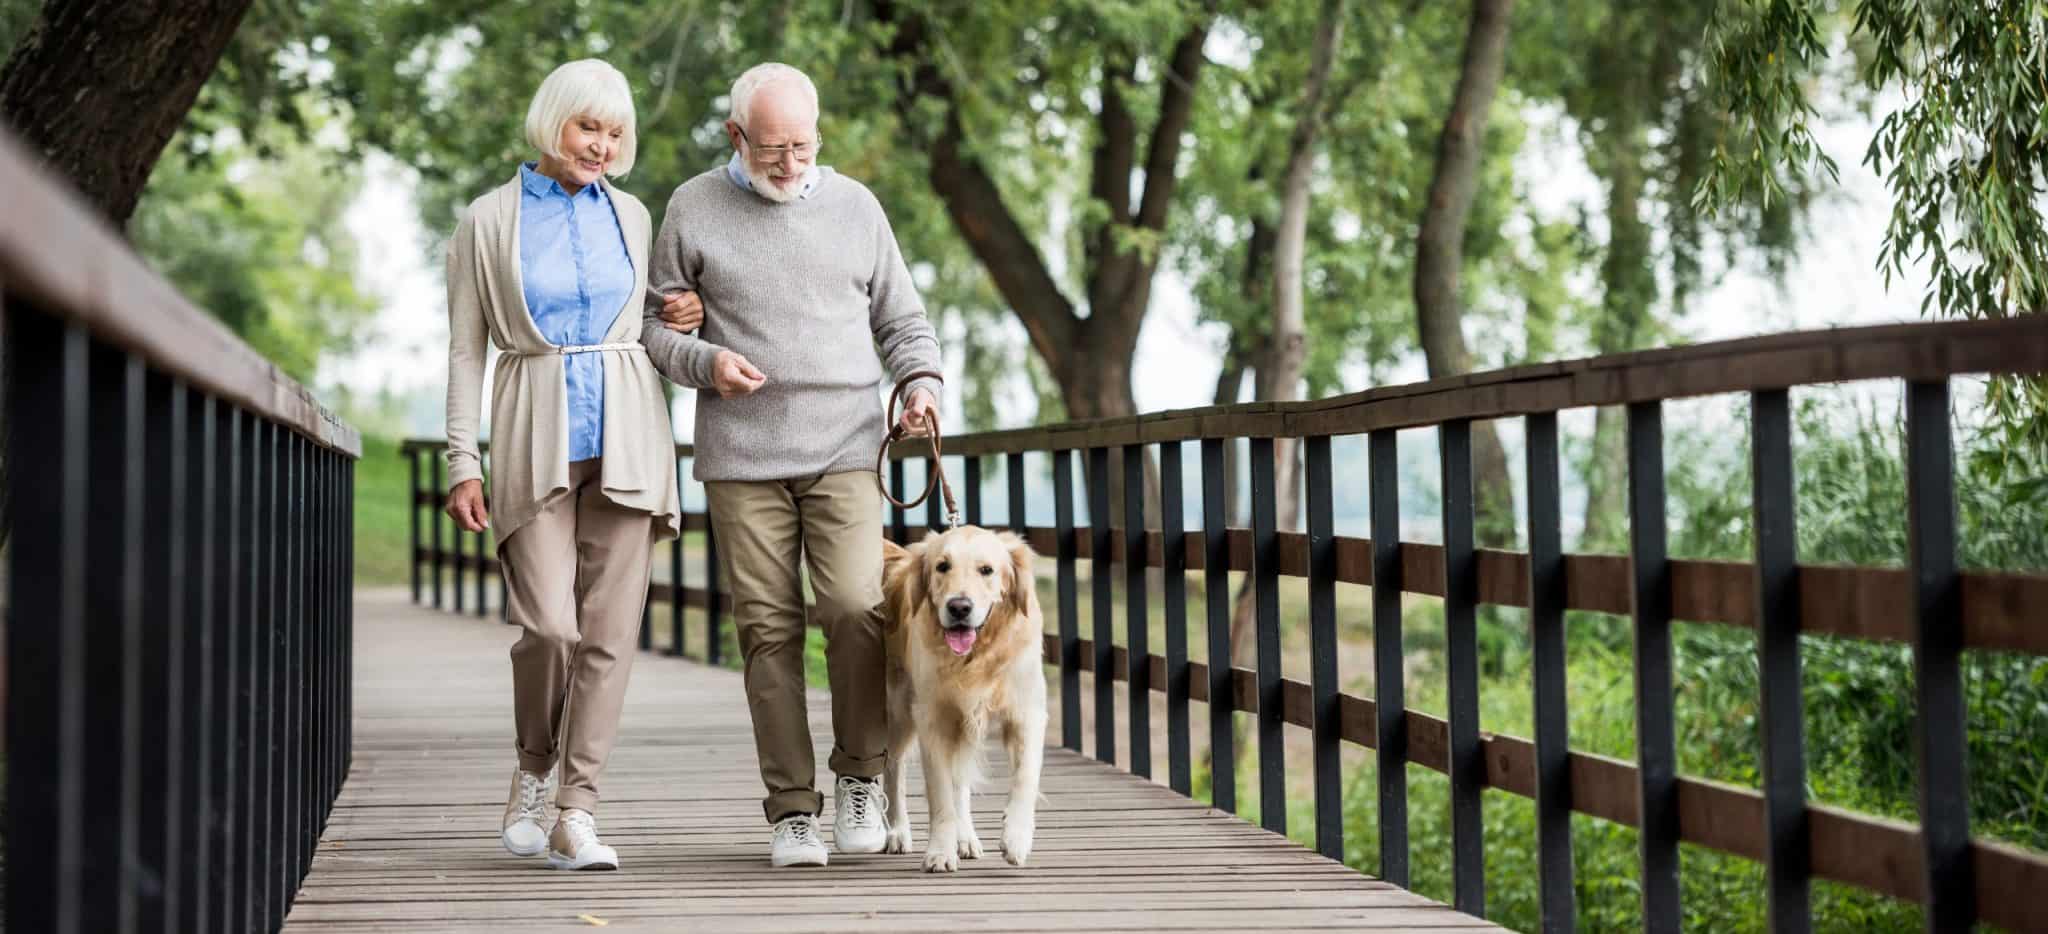 Promoting Physical Activity in Older Adults